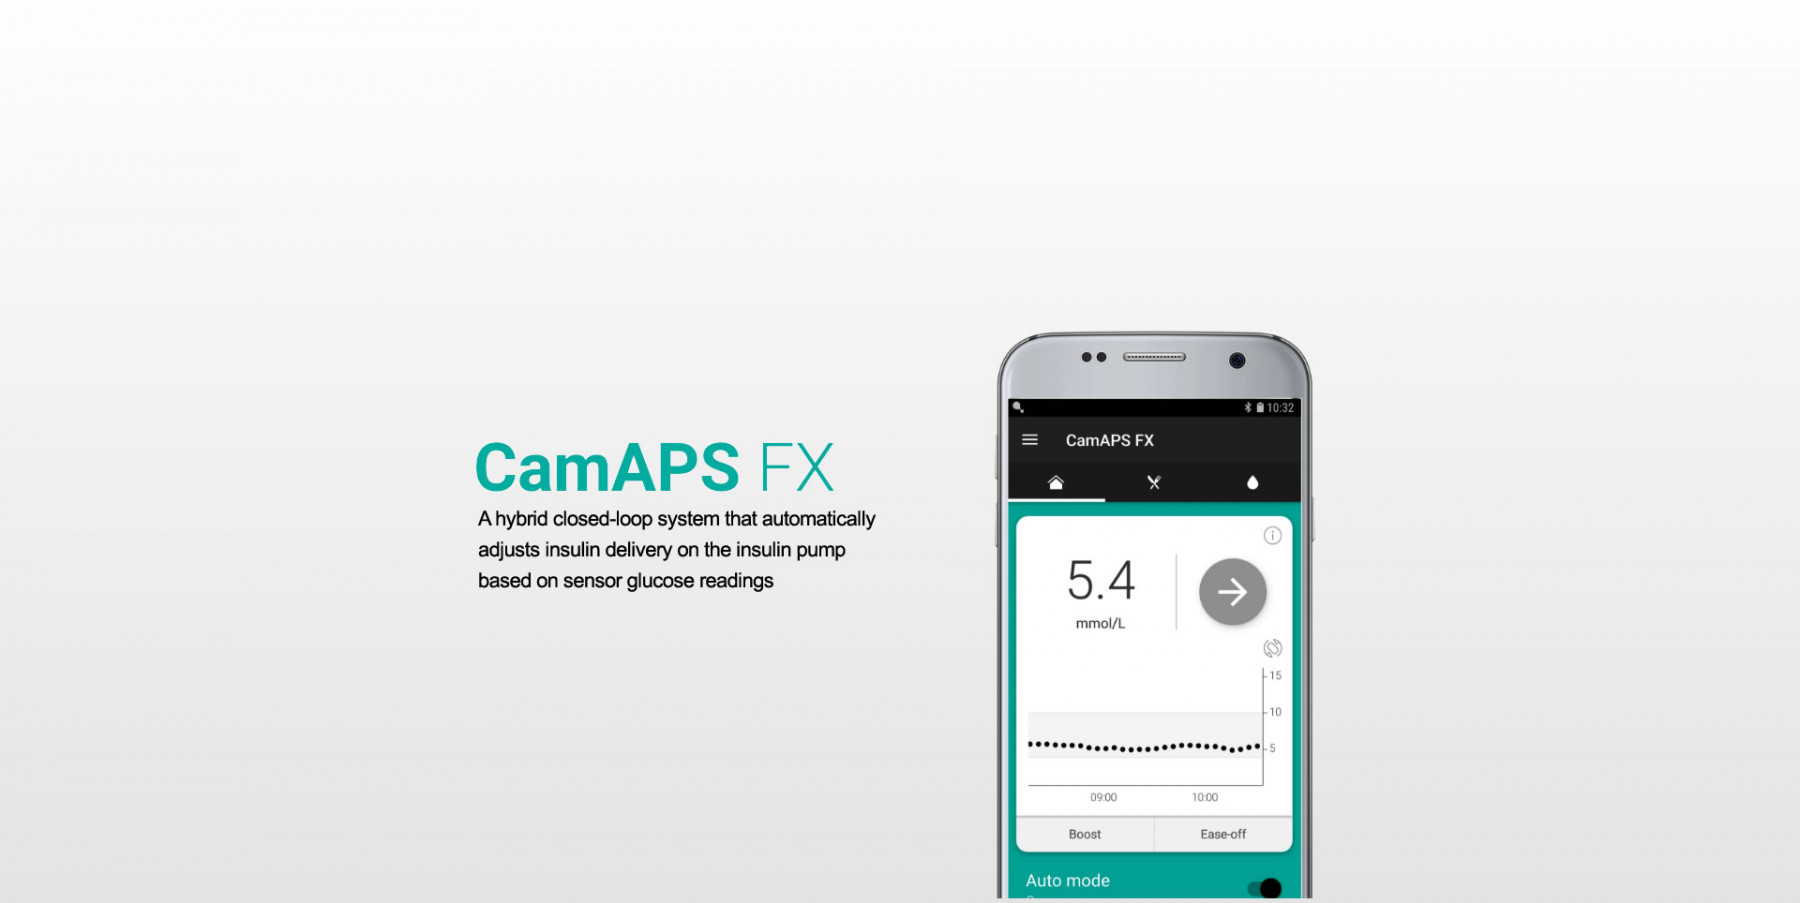 Cam Aps FX E-learning system Multi-lingual, multi-device insulin pump e-learning for mylife YpsoPump and Dana - updated May 2022